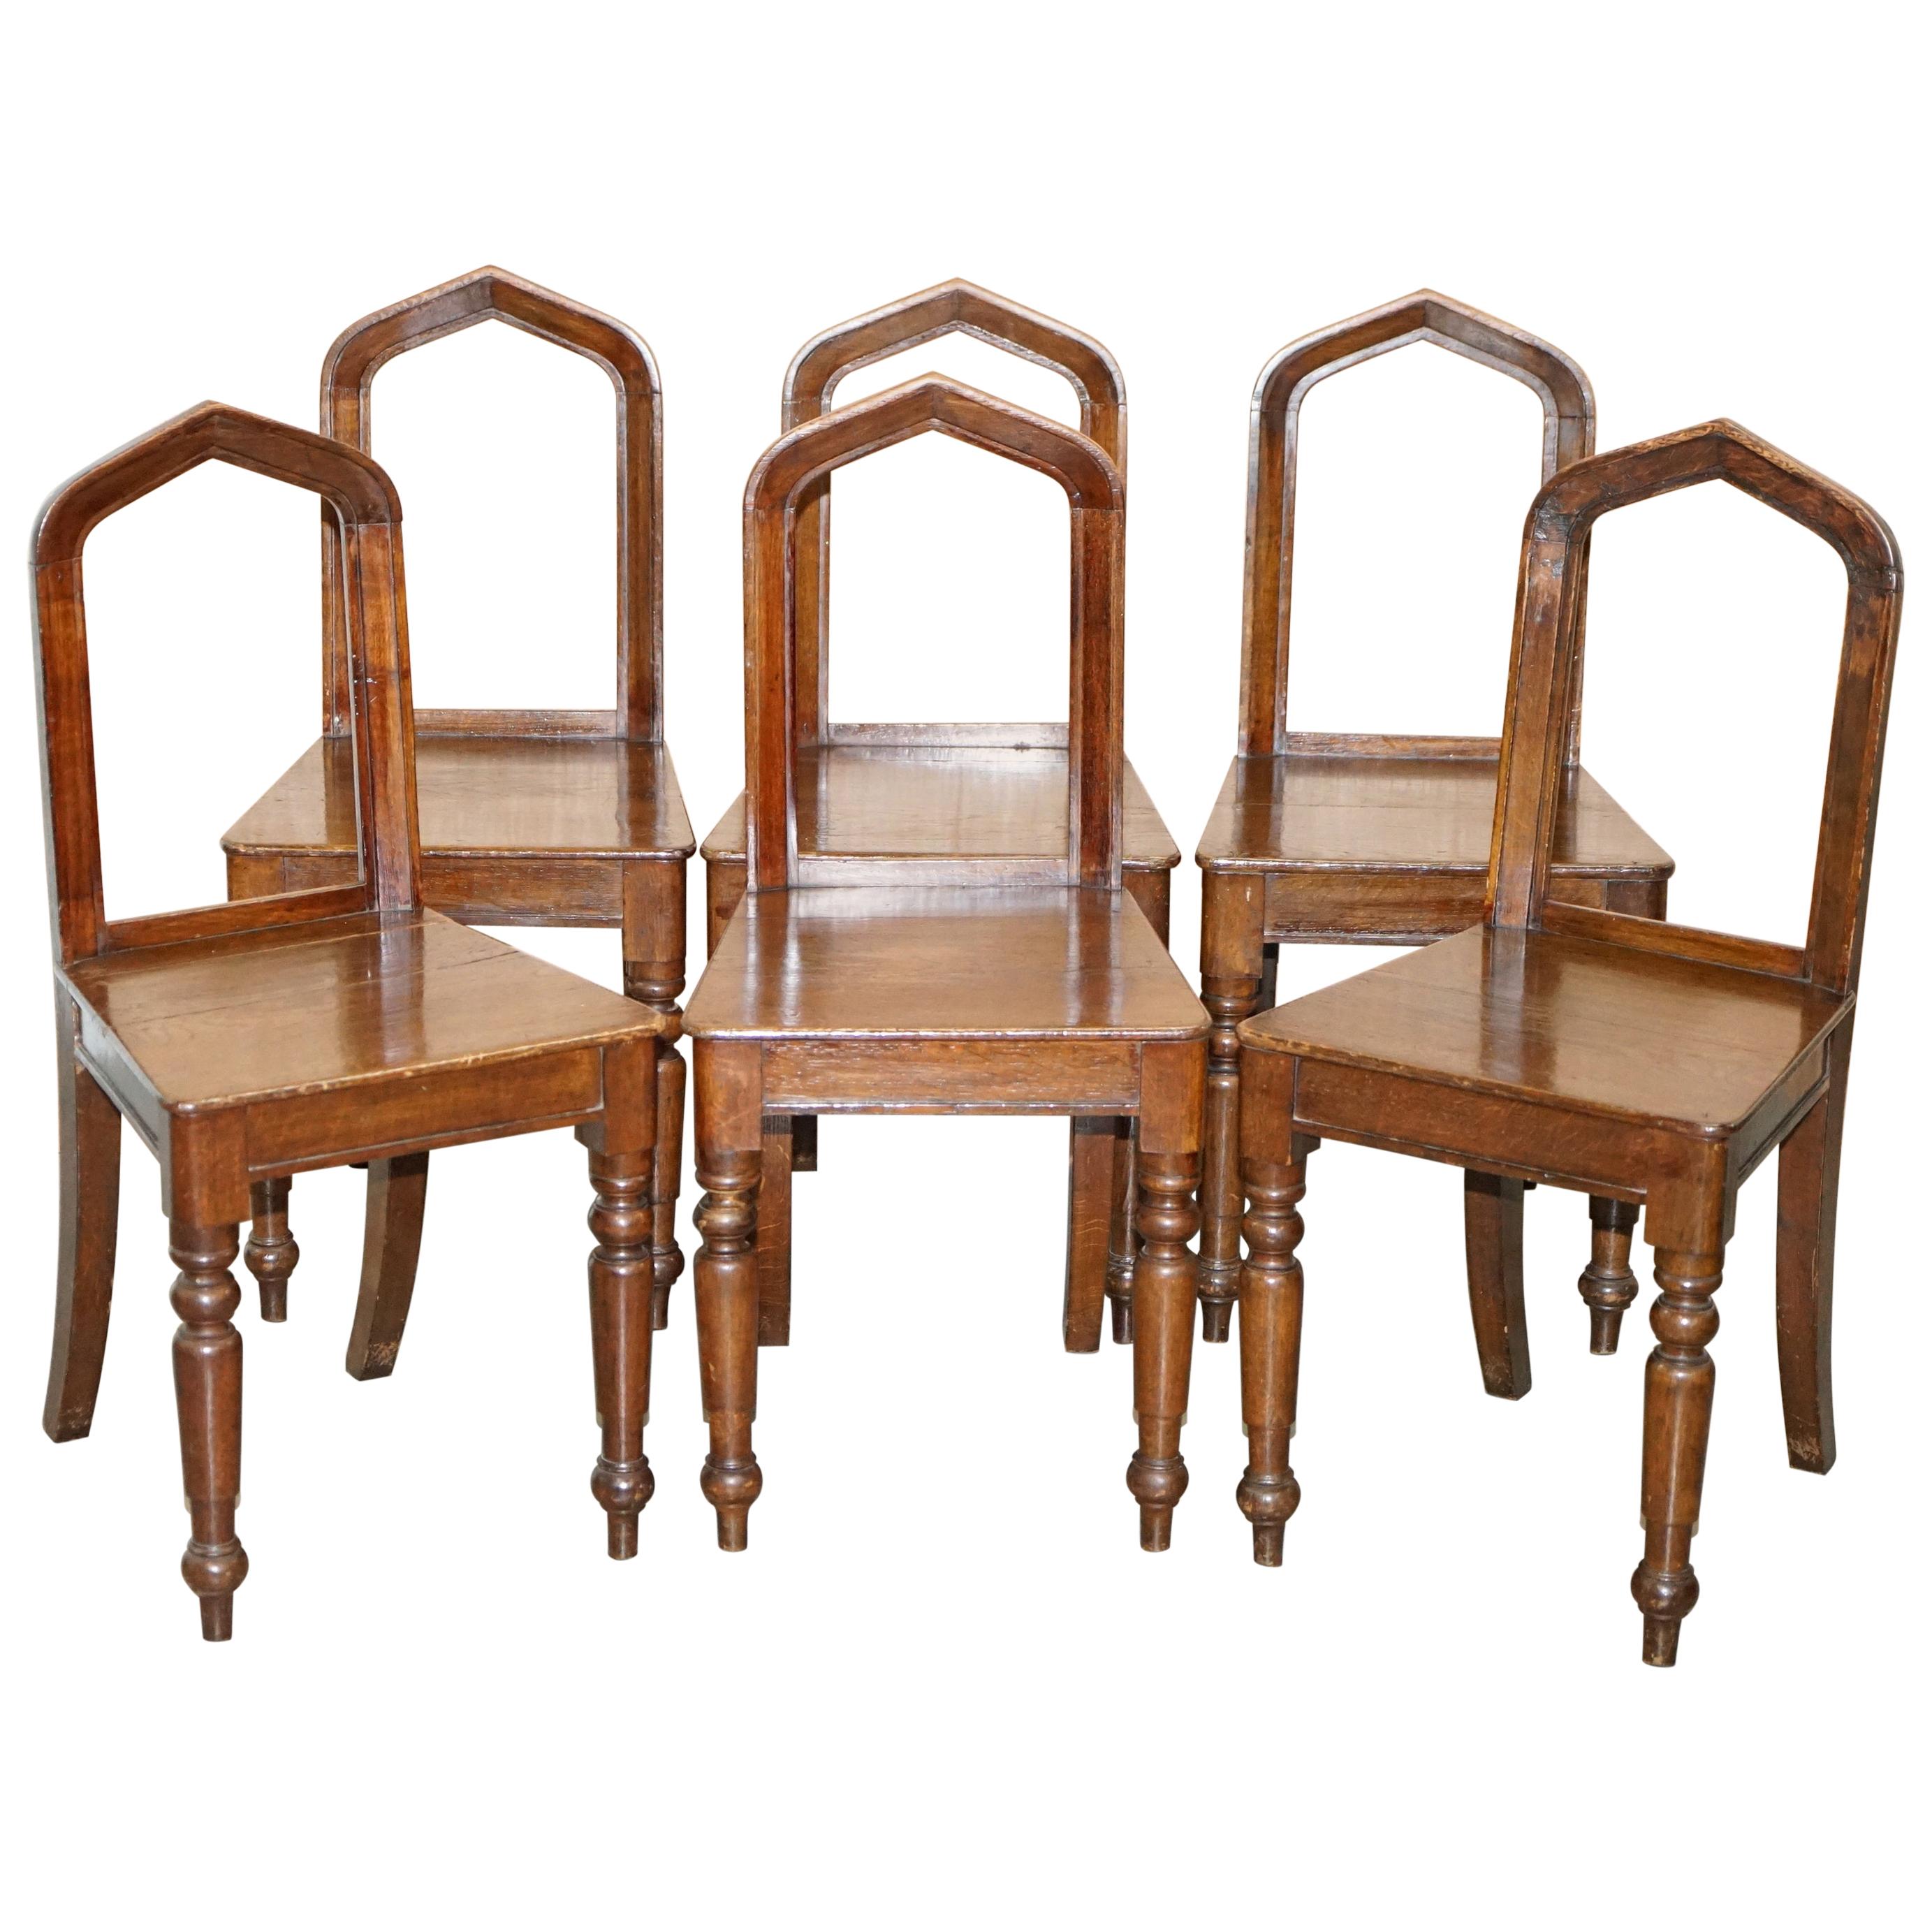 Six Original Victorian circa 1890 Steeple Back Gothic Arch Oak Dining Chairs 6 For Sale